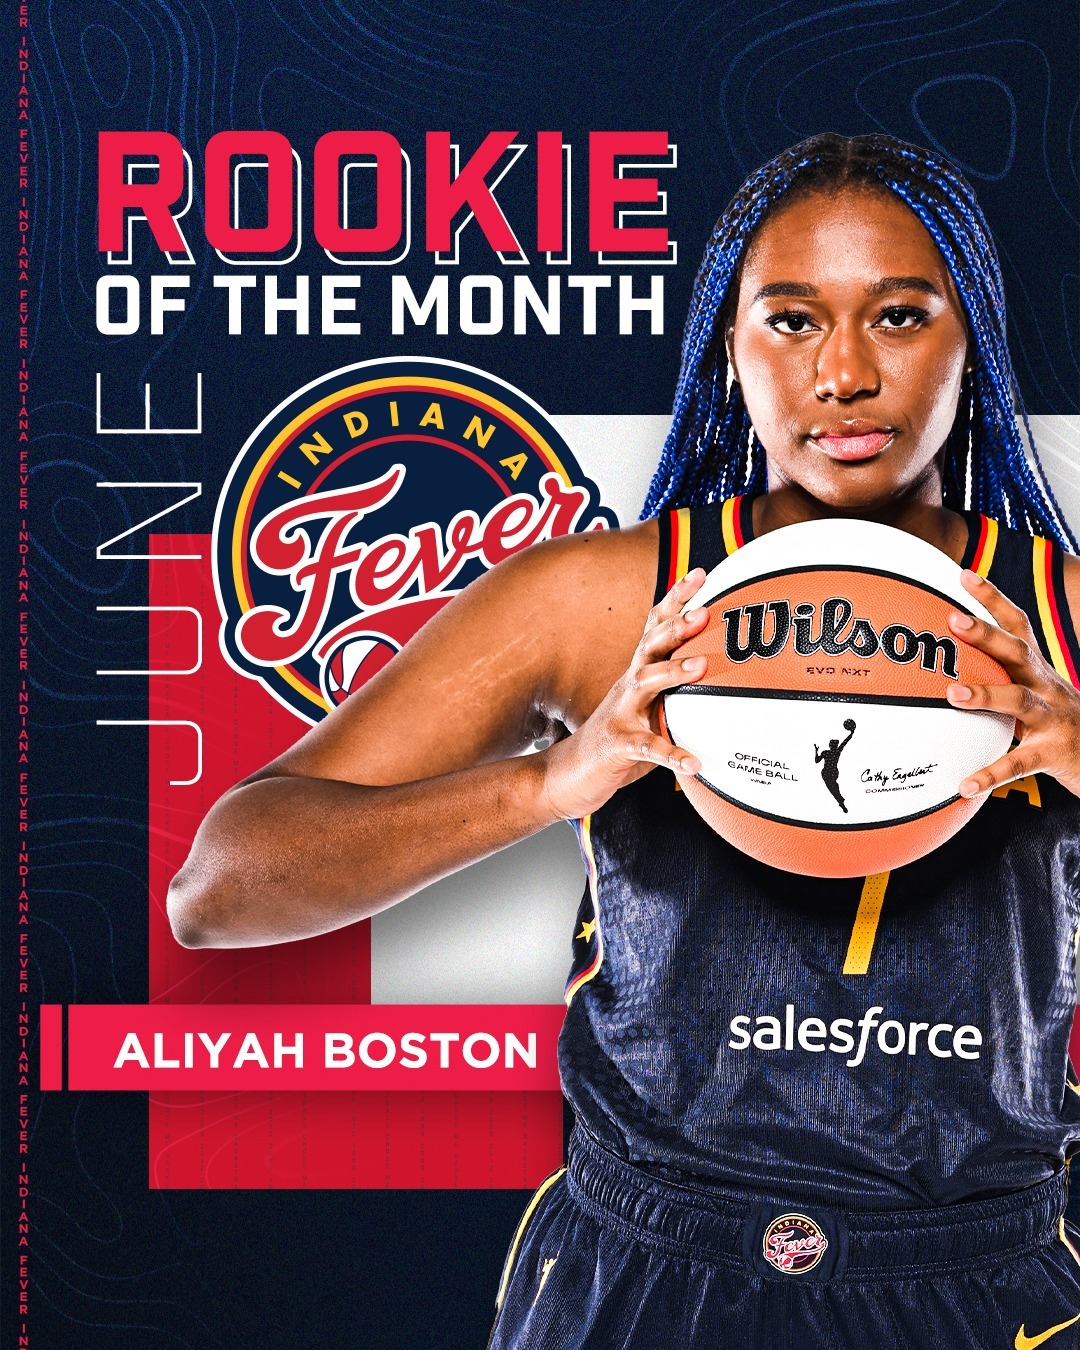 Indiana Fever’s Aliyah Boston named WNBA Rookie of the Month again